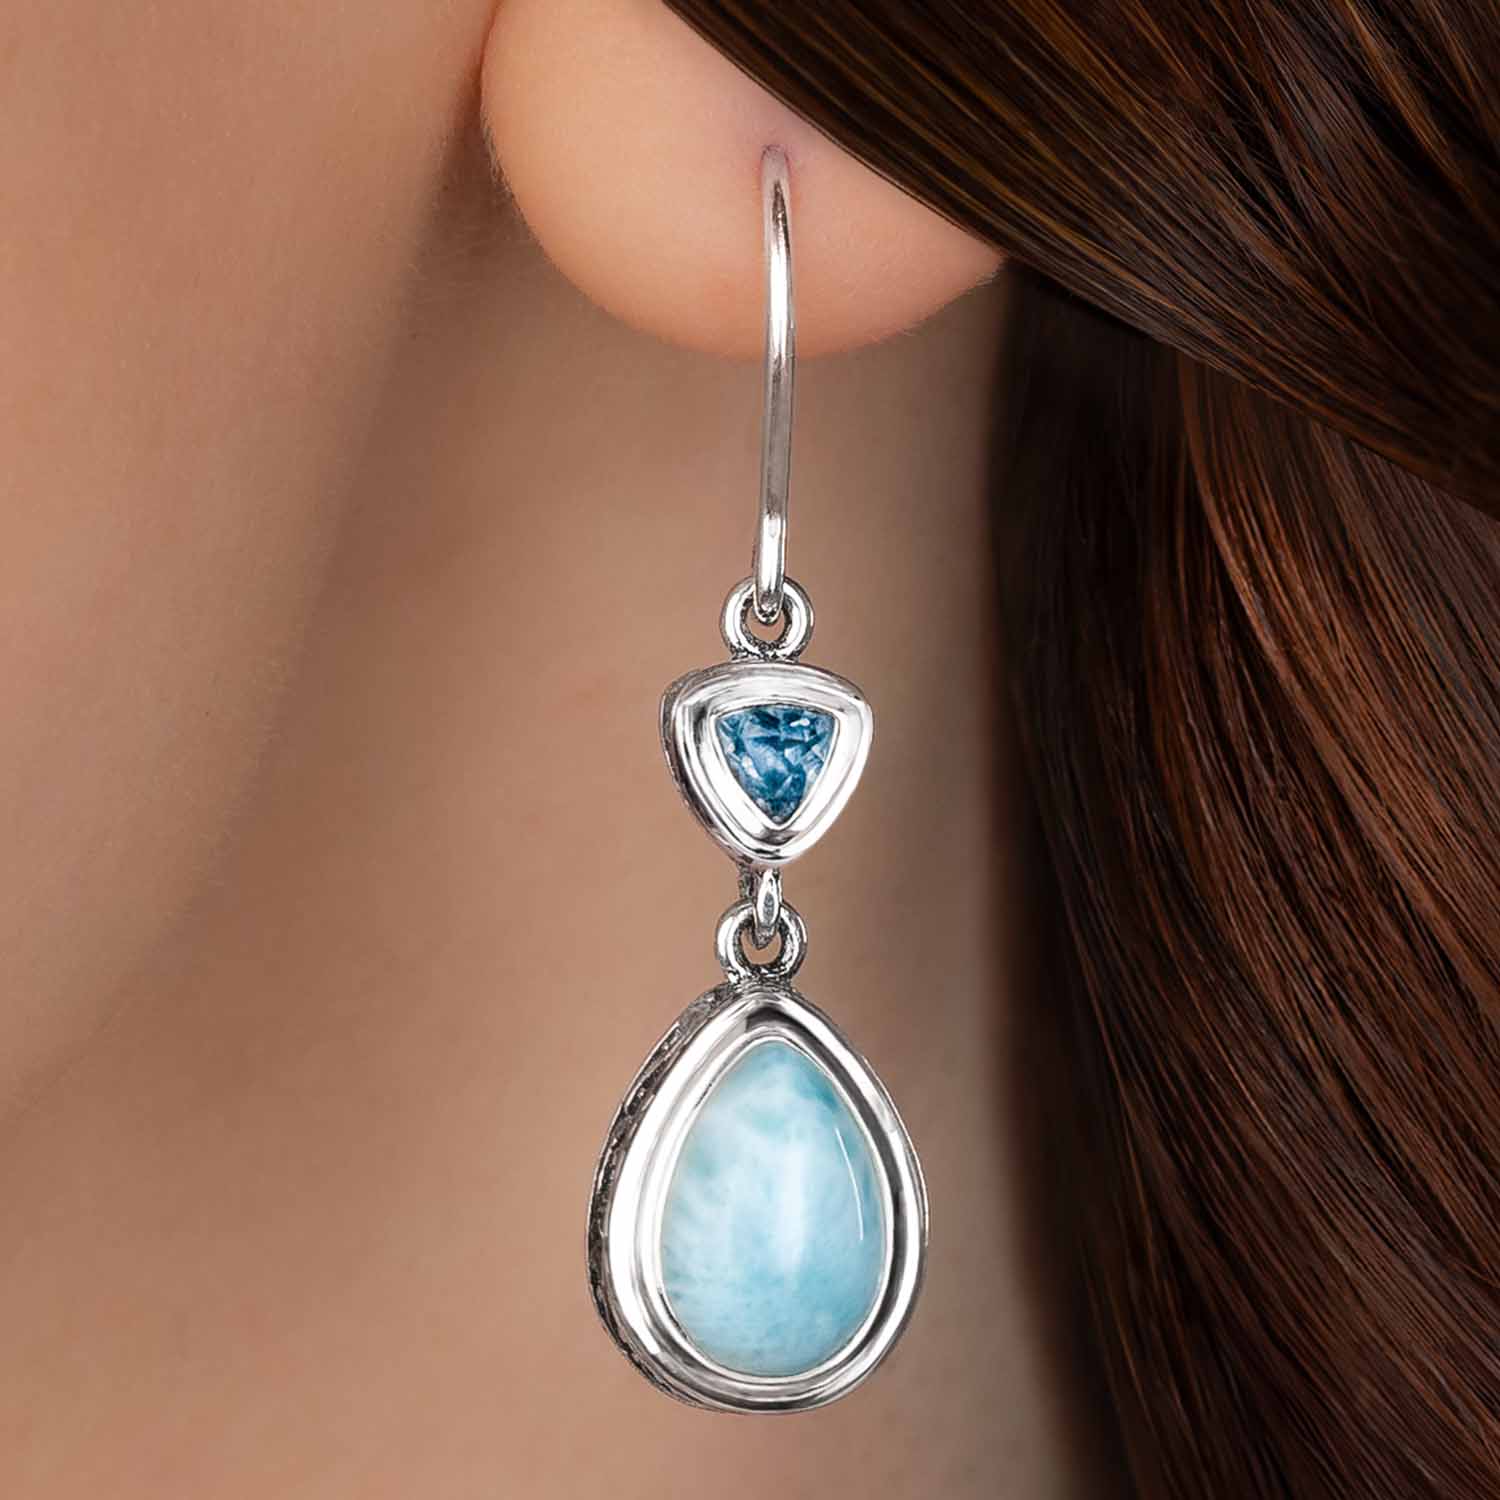 Blue Stone Earrings with spinel and larimar by marahlago.